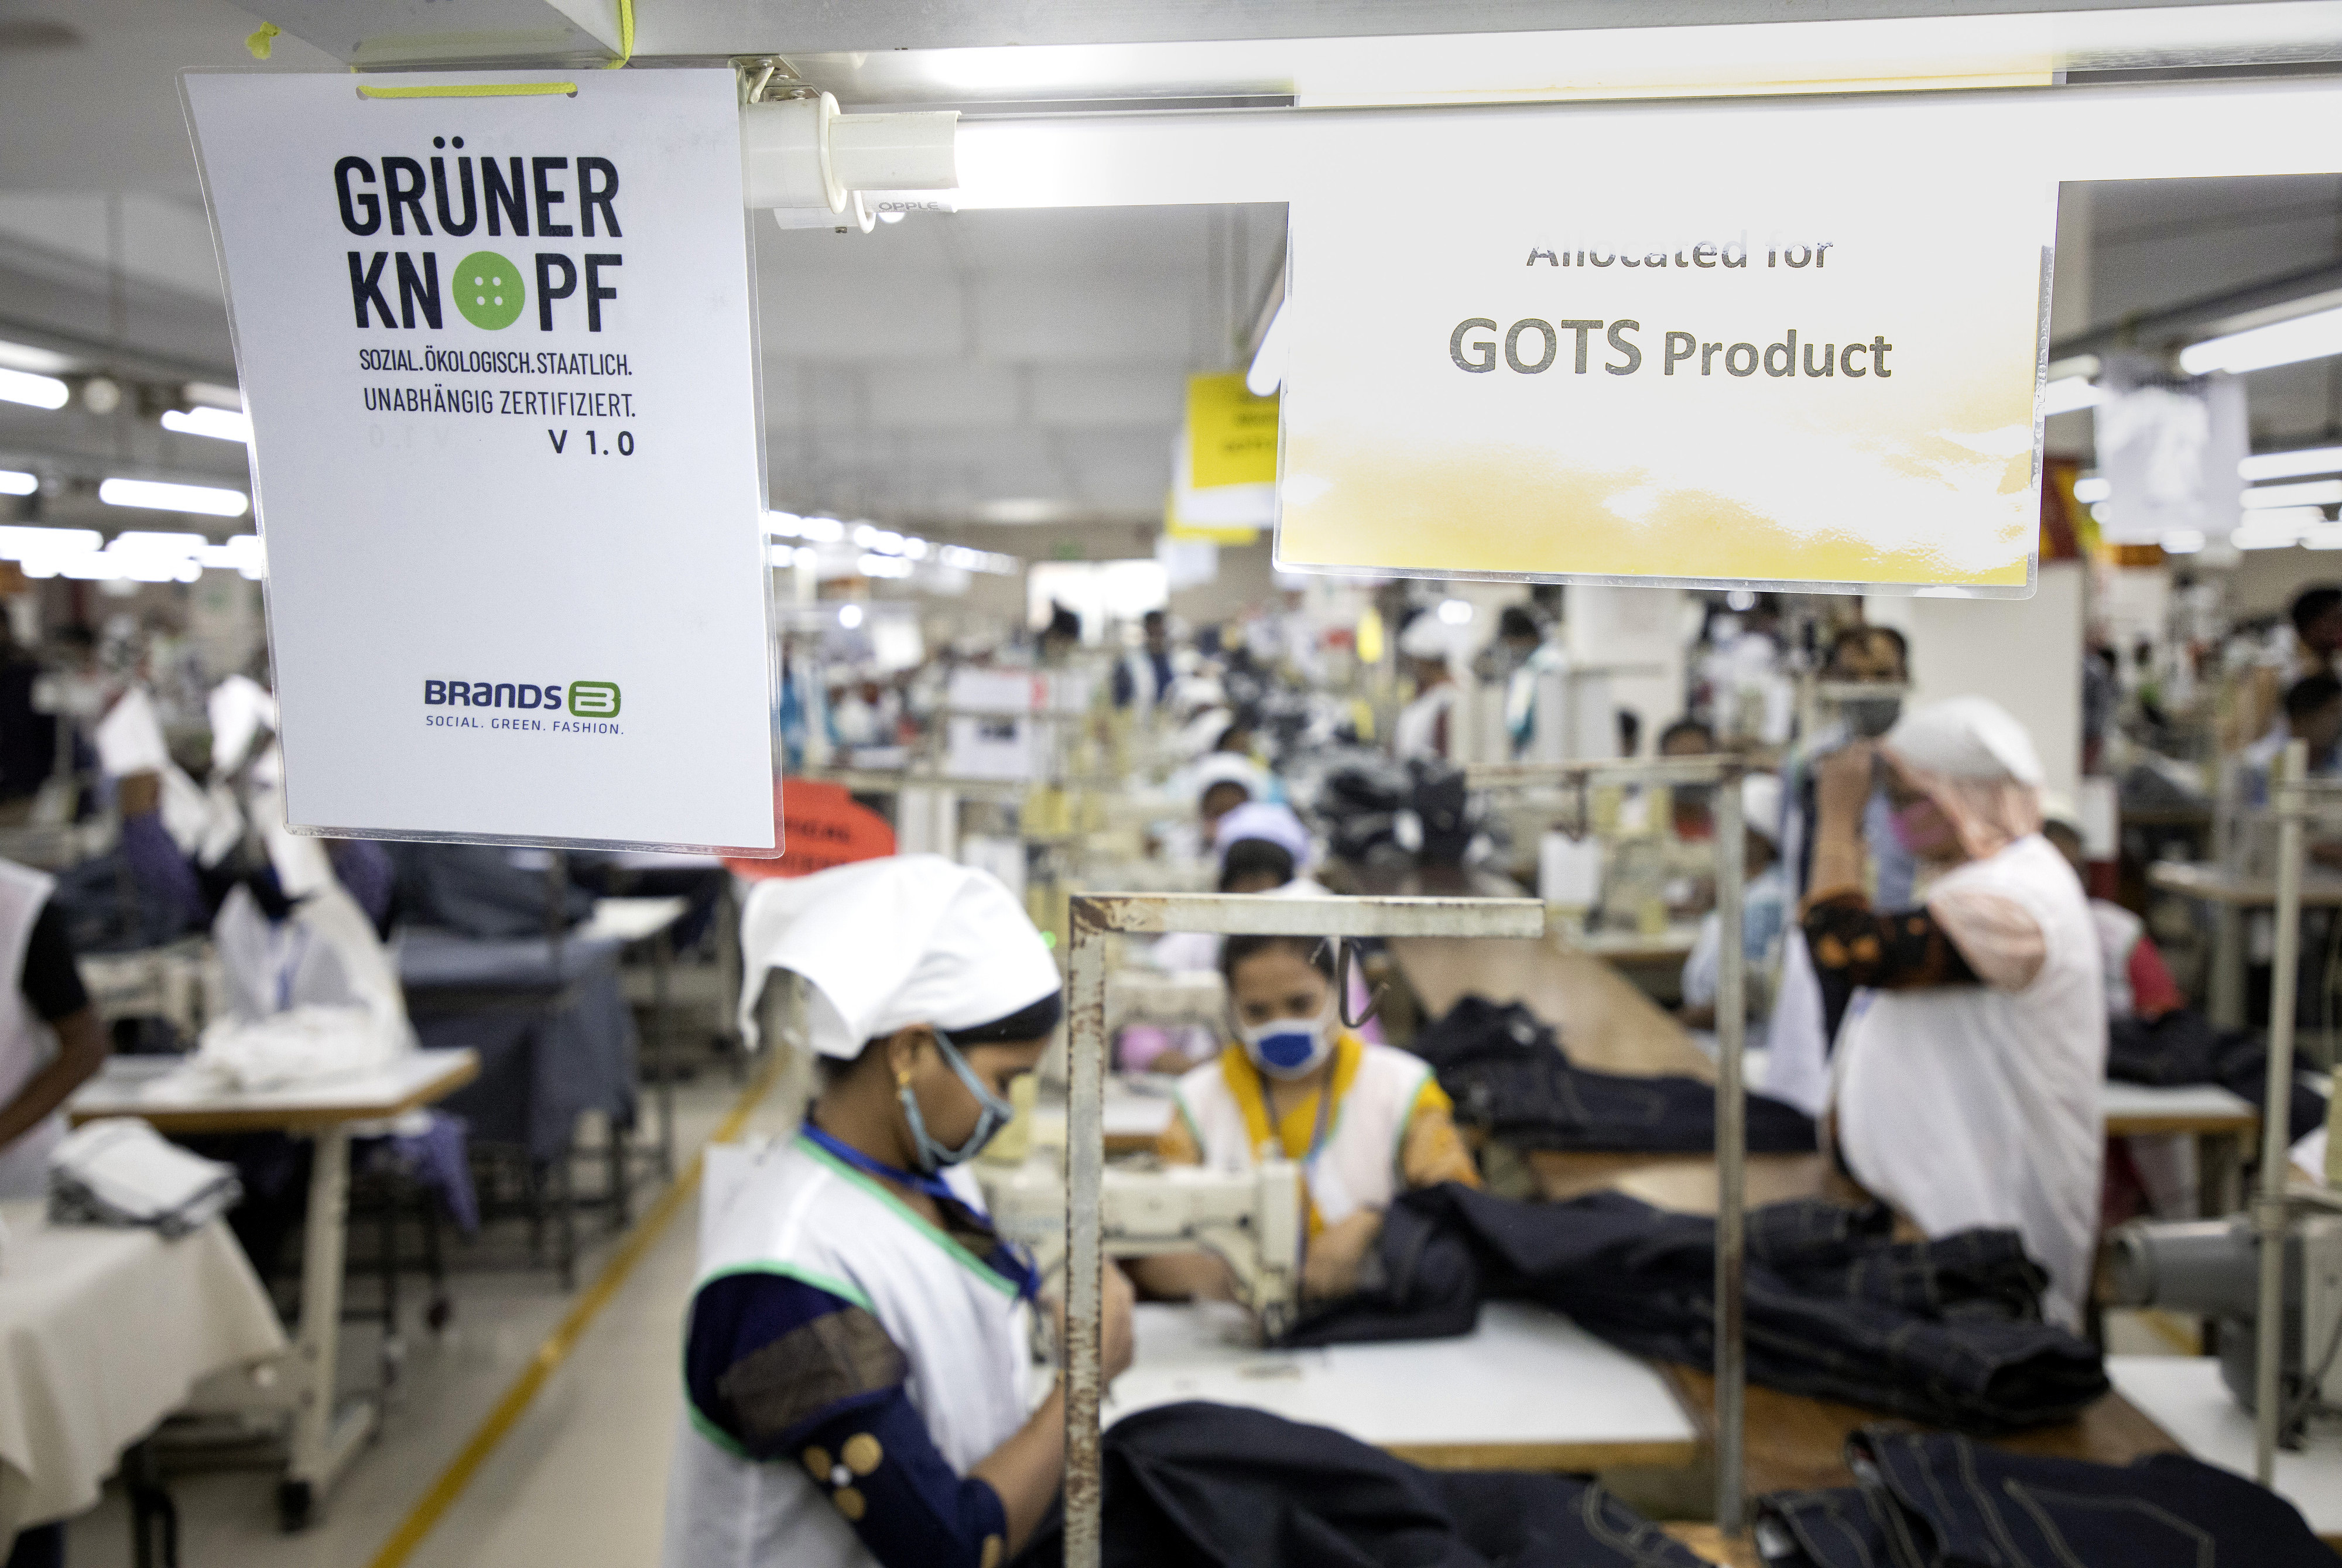 Radisson Garments Ltd. textile factory in Dhaka, Bangladesh. Here textiles are produced according to the Green Button standards.